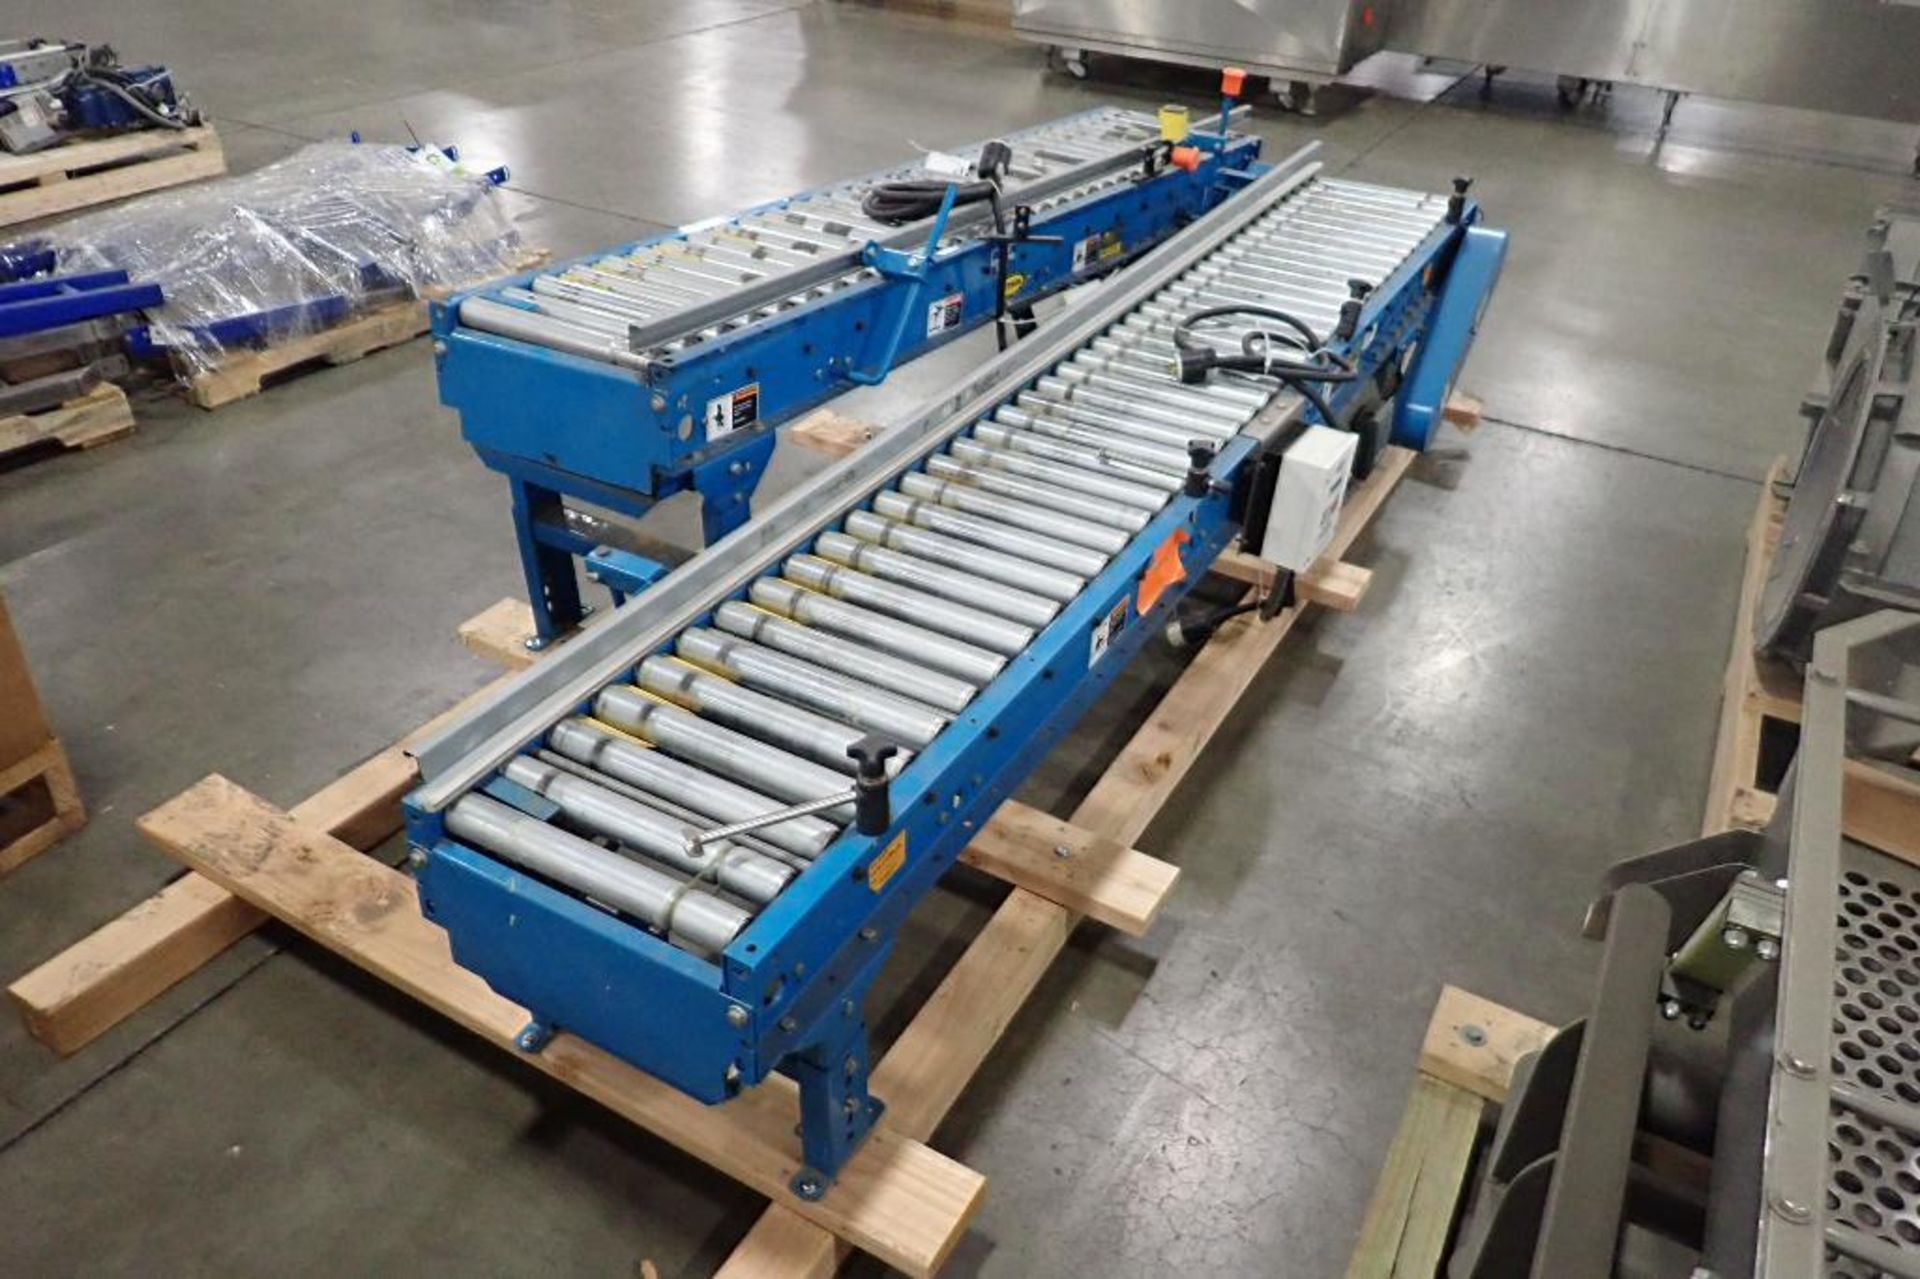 Skid of Hytrol powered roller conveyor, approx. 18 ft. long x 15 in. wide, motors and drives, speed